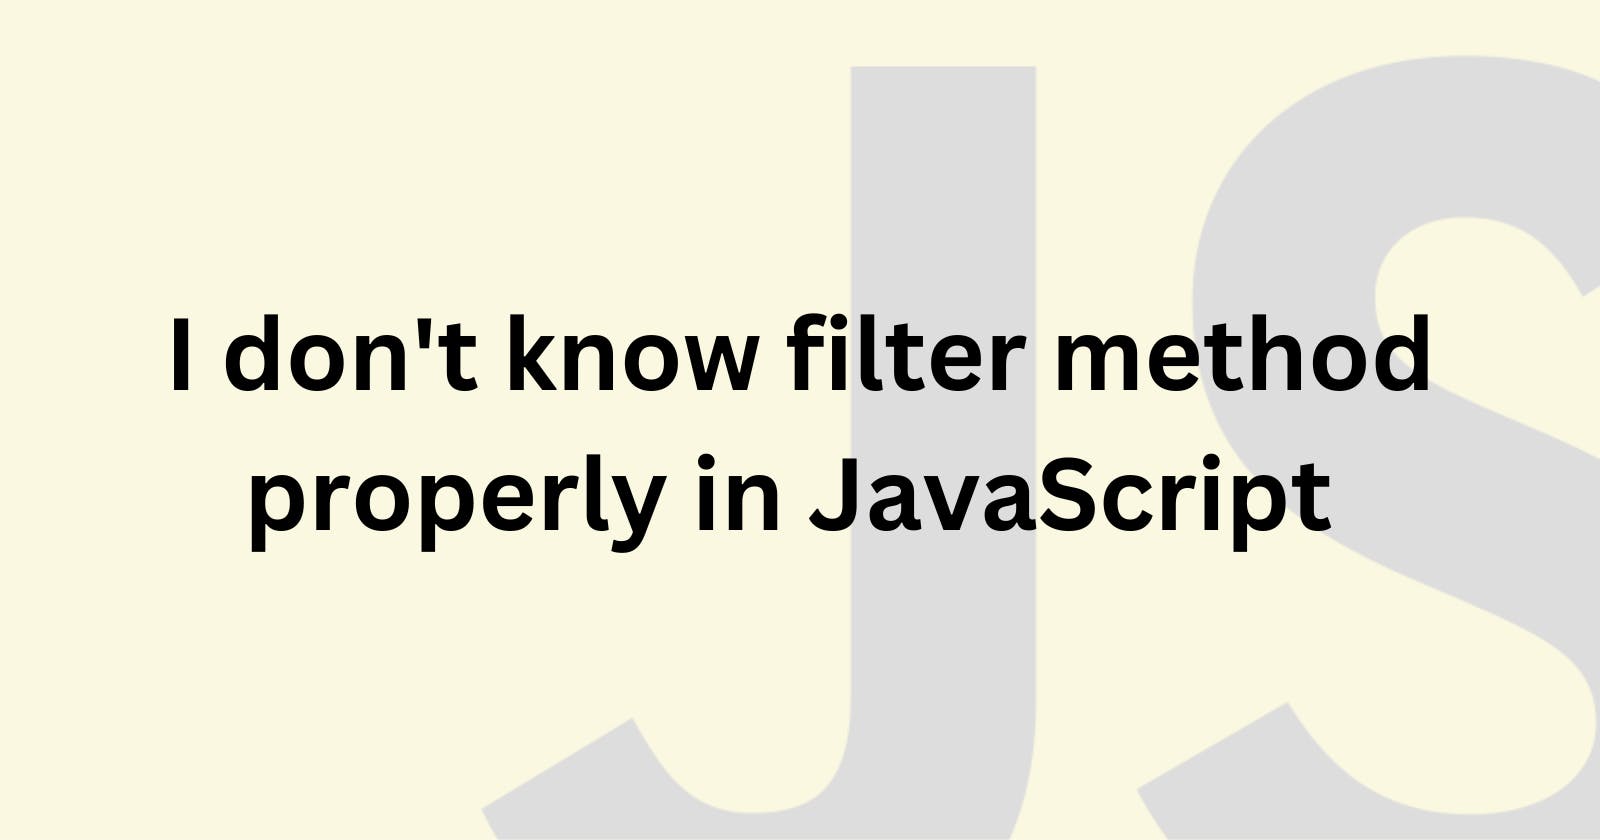 I don't know filter method properly in JavaScript